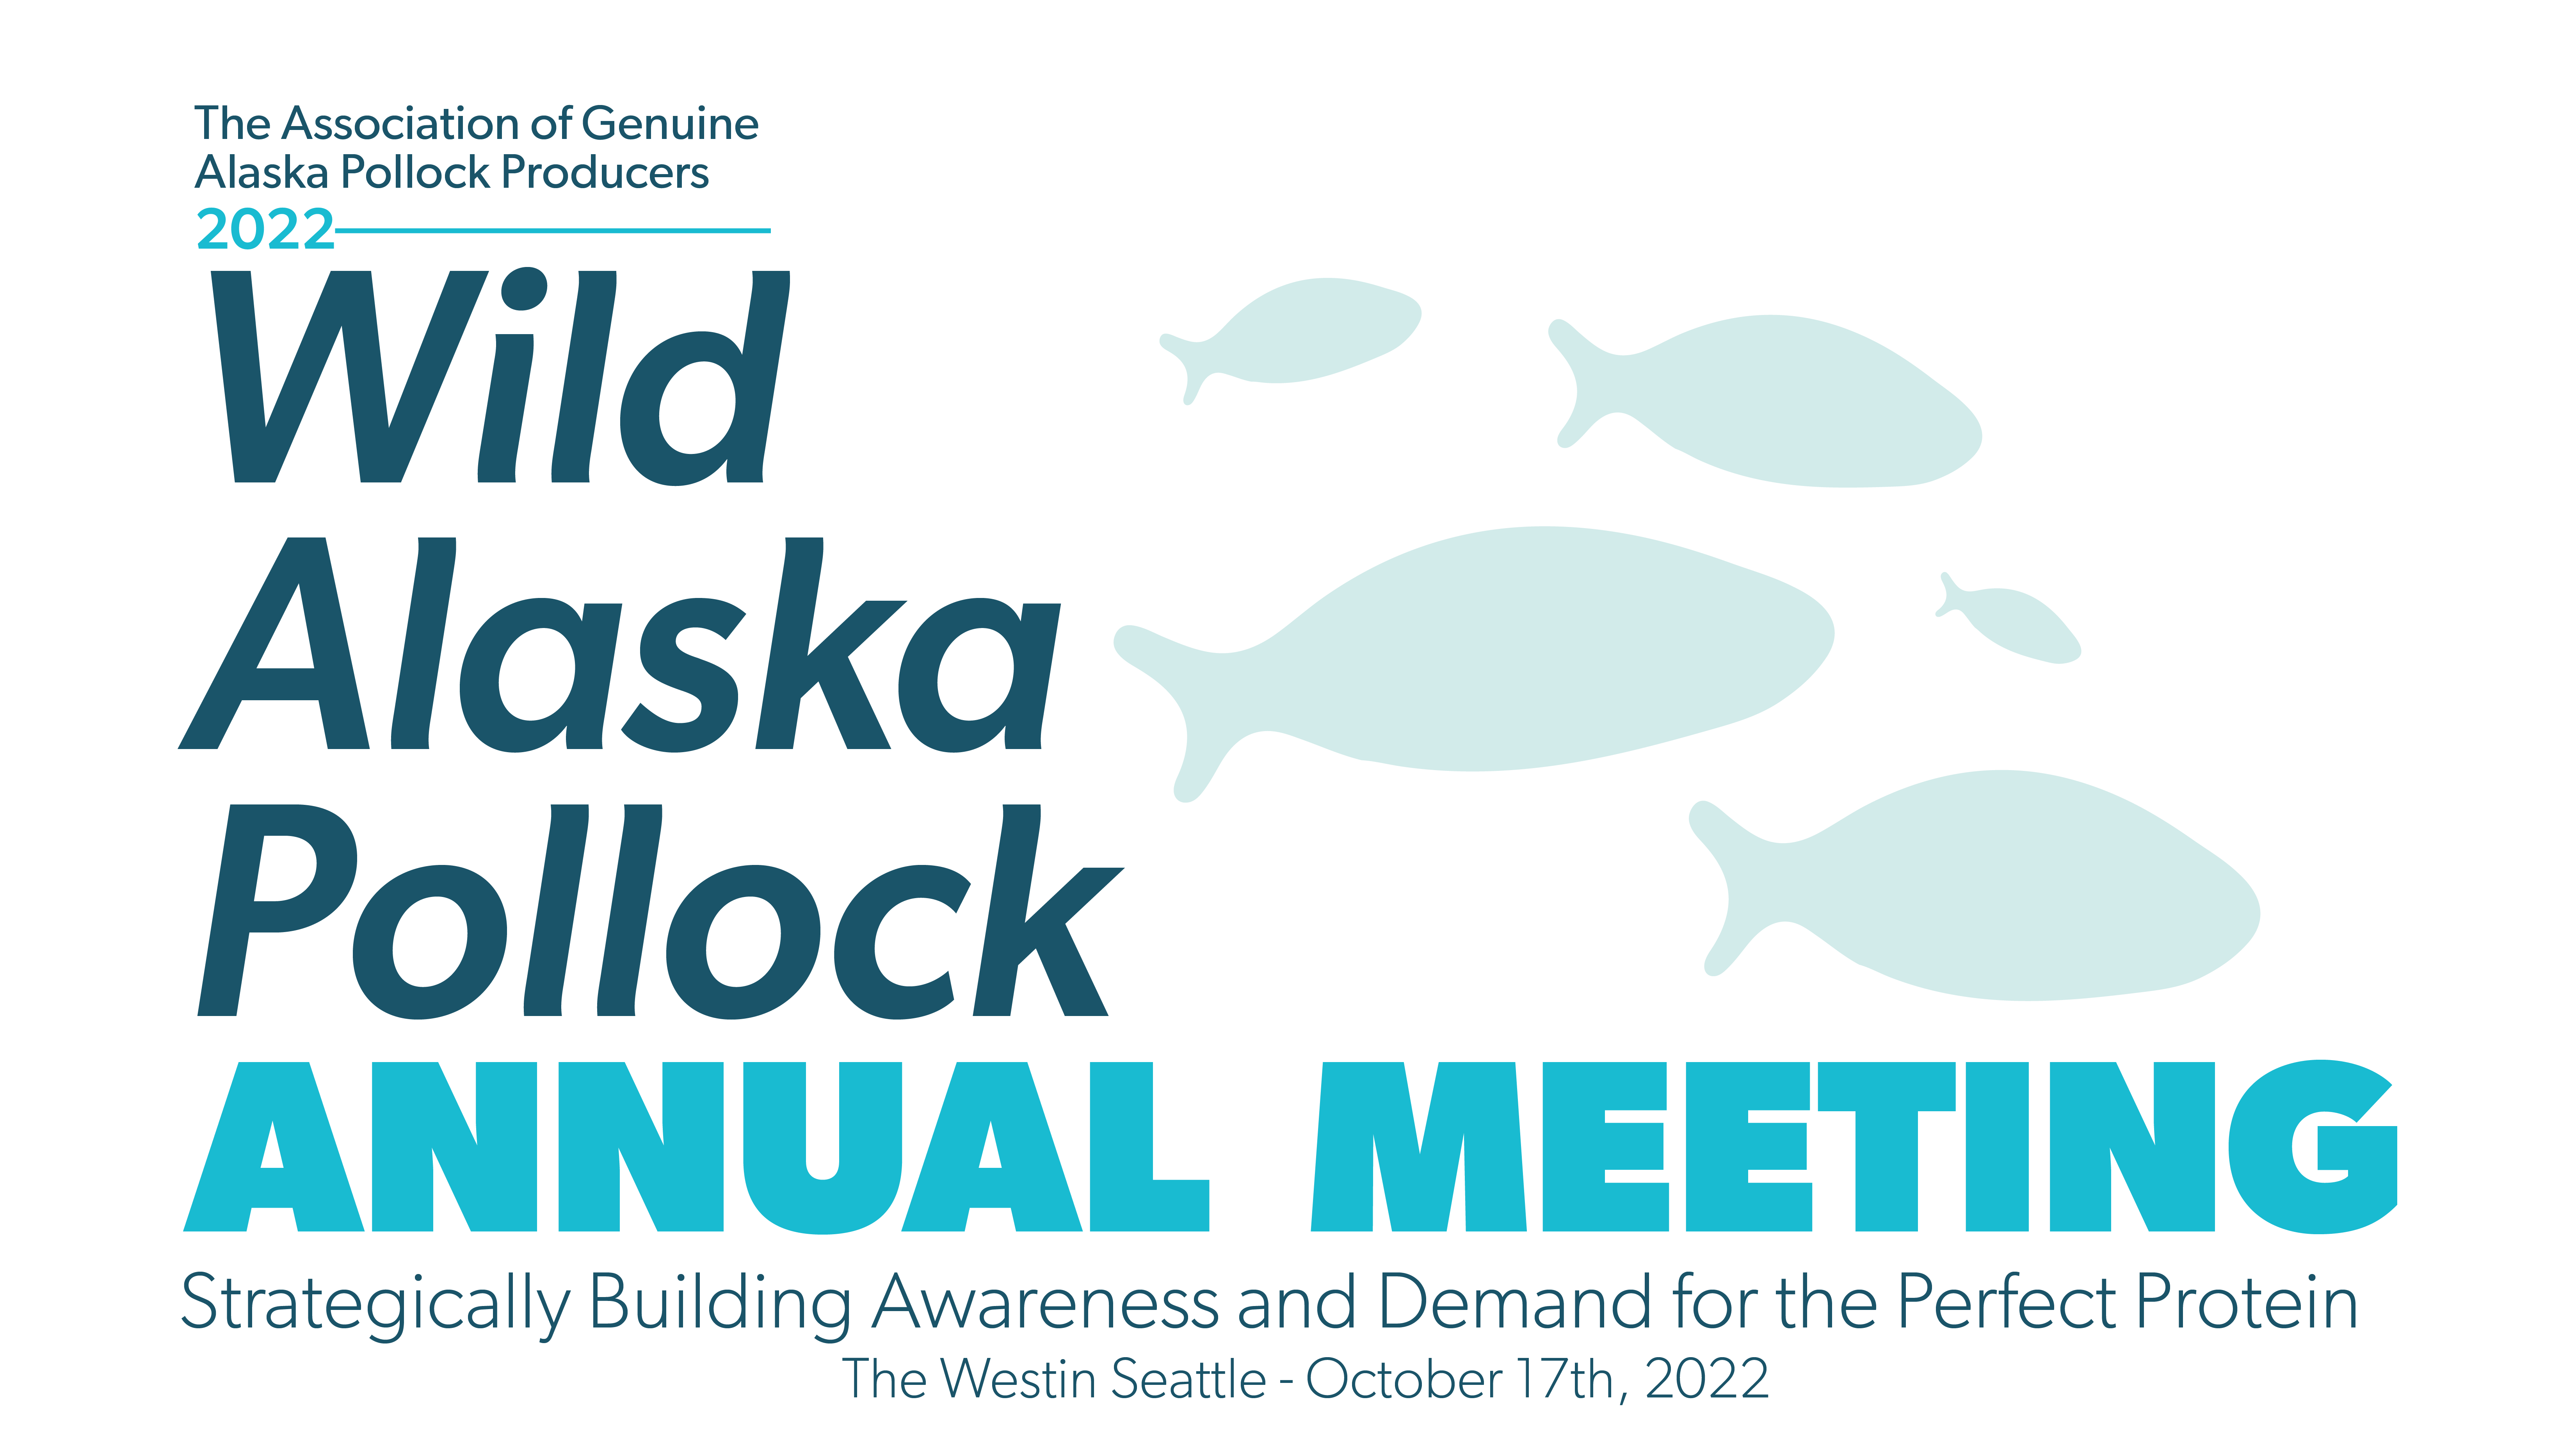 GAPP to Hold 4th Annual Wild Alaska Pollock Meeting in October; SeafoodNews Editor to MC